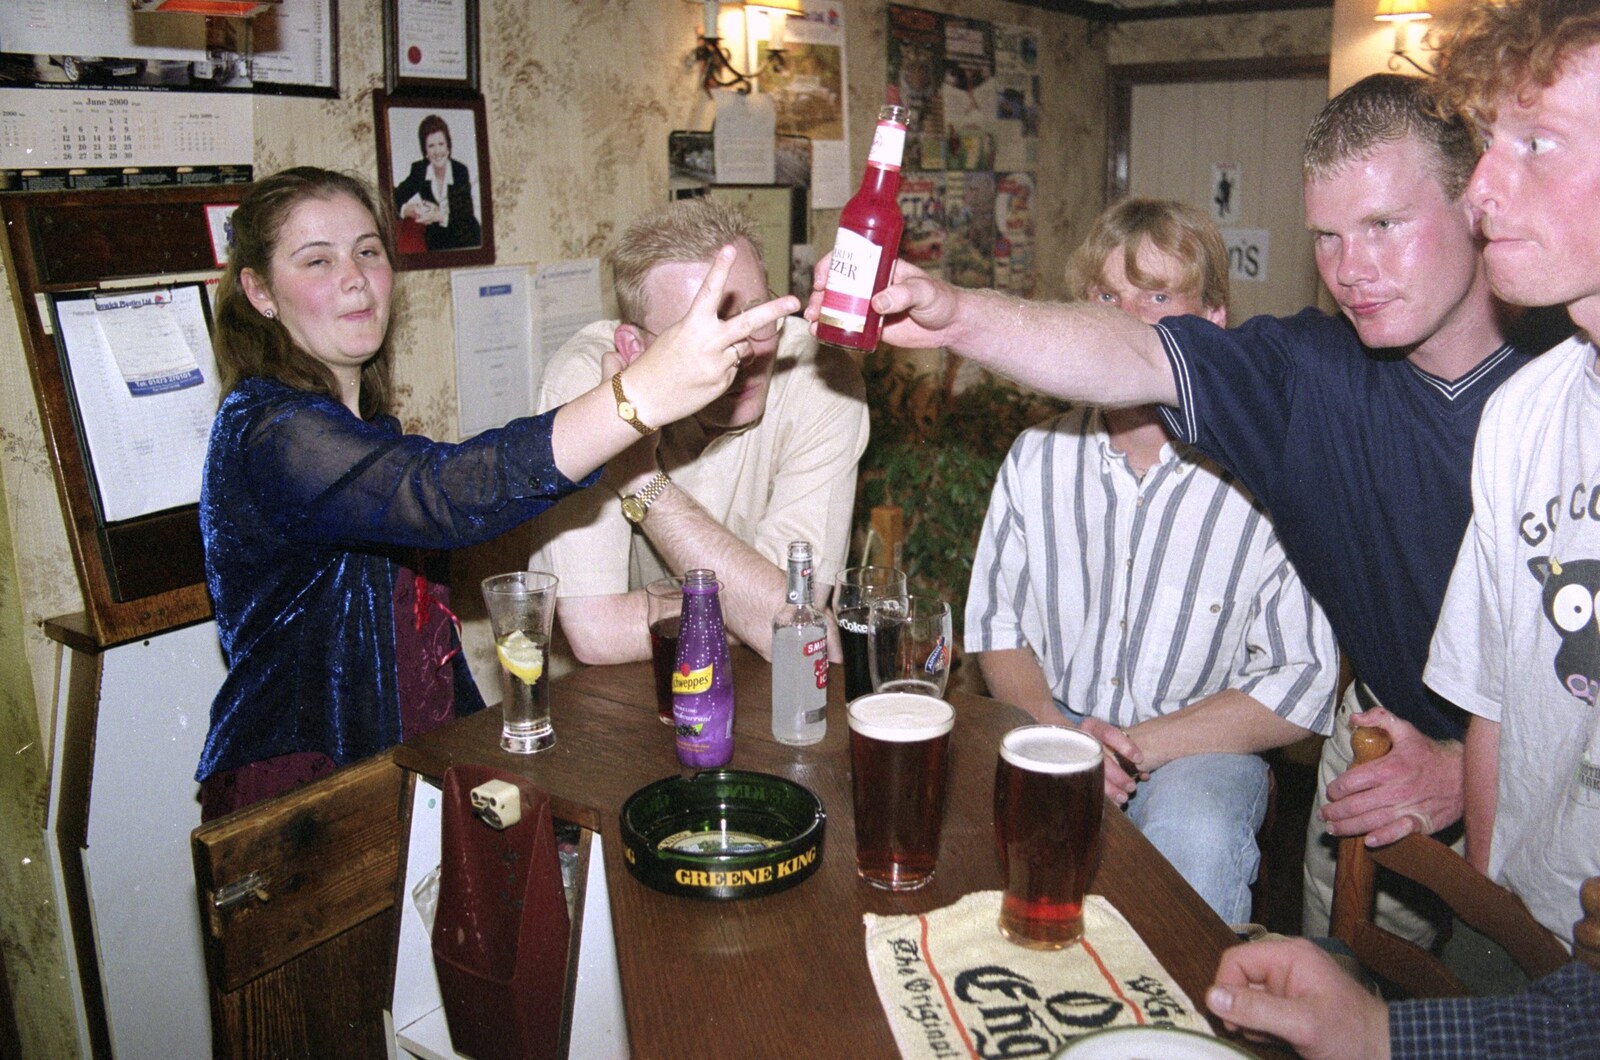 Lorraine's 21st Birthday, The Swan, Suffolk - 10th June 2000: Mikey P shows off one of his alco-pops